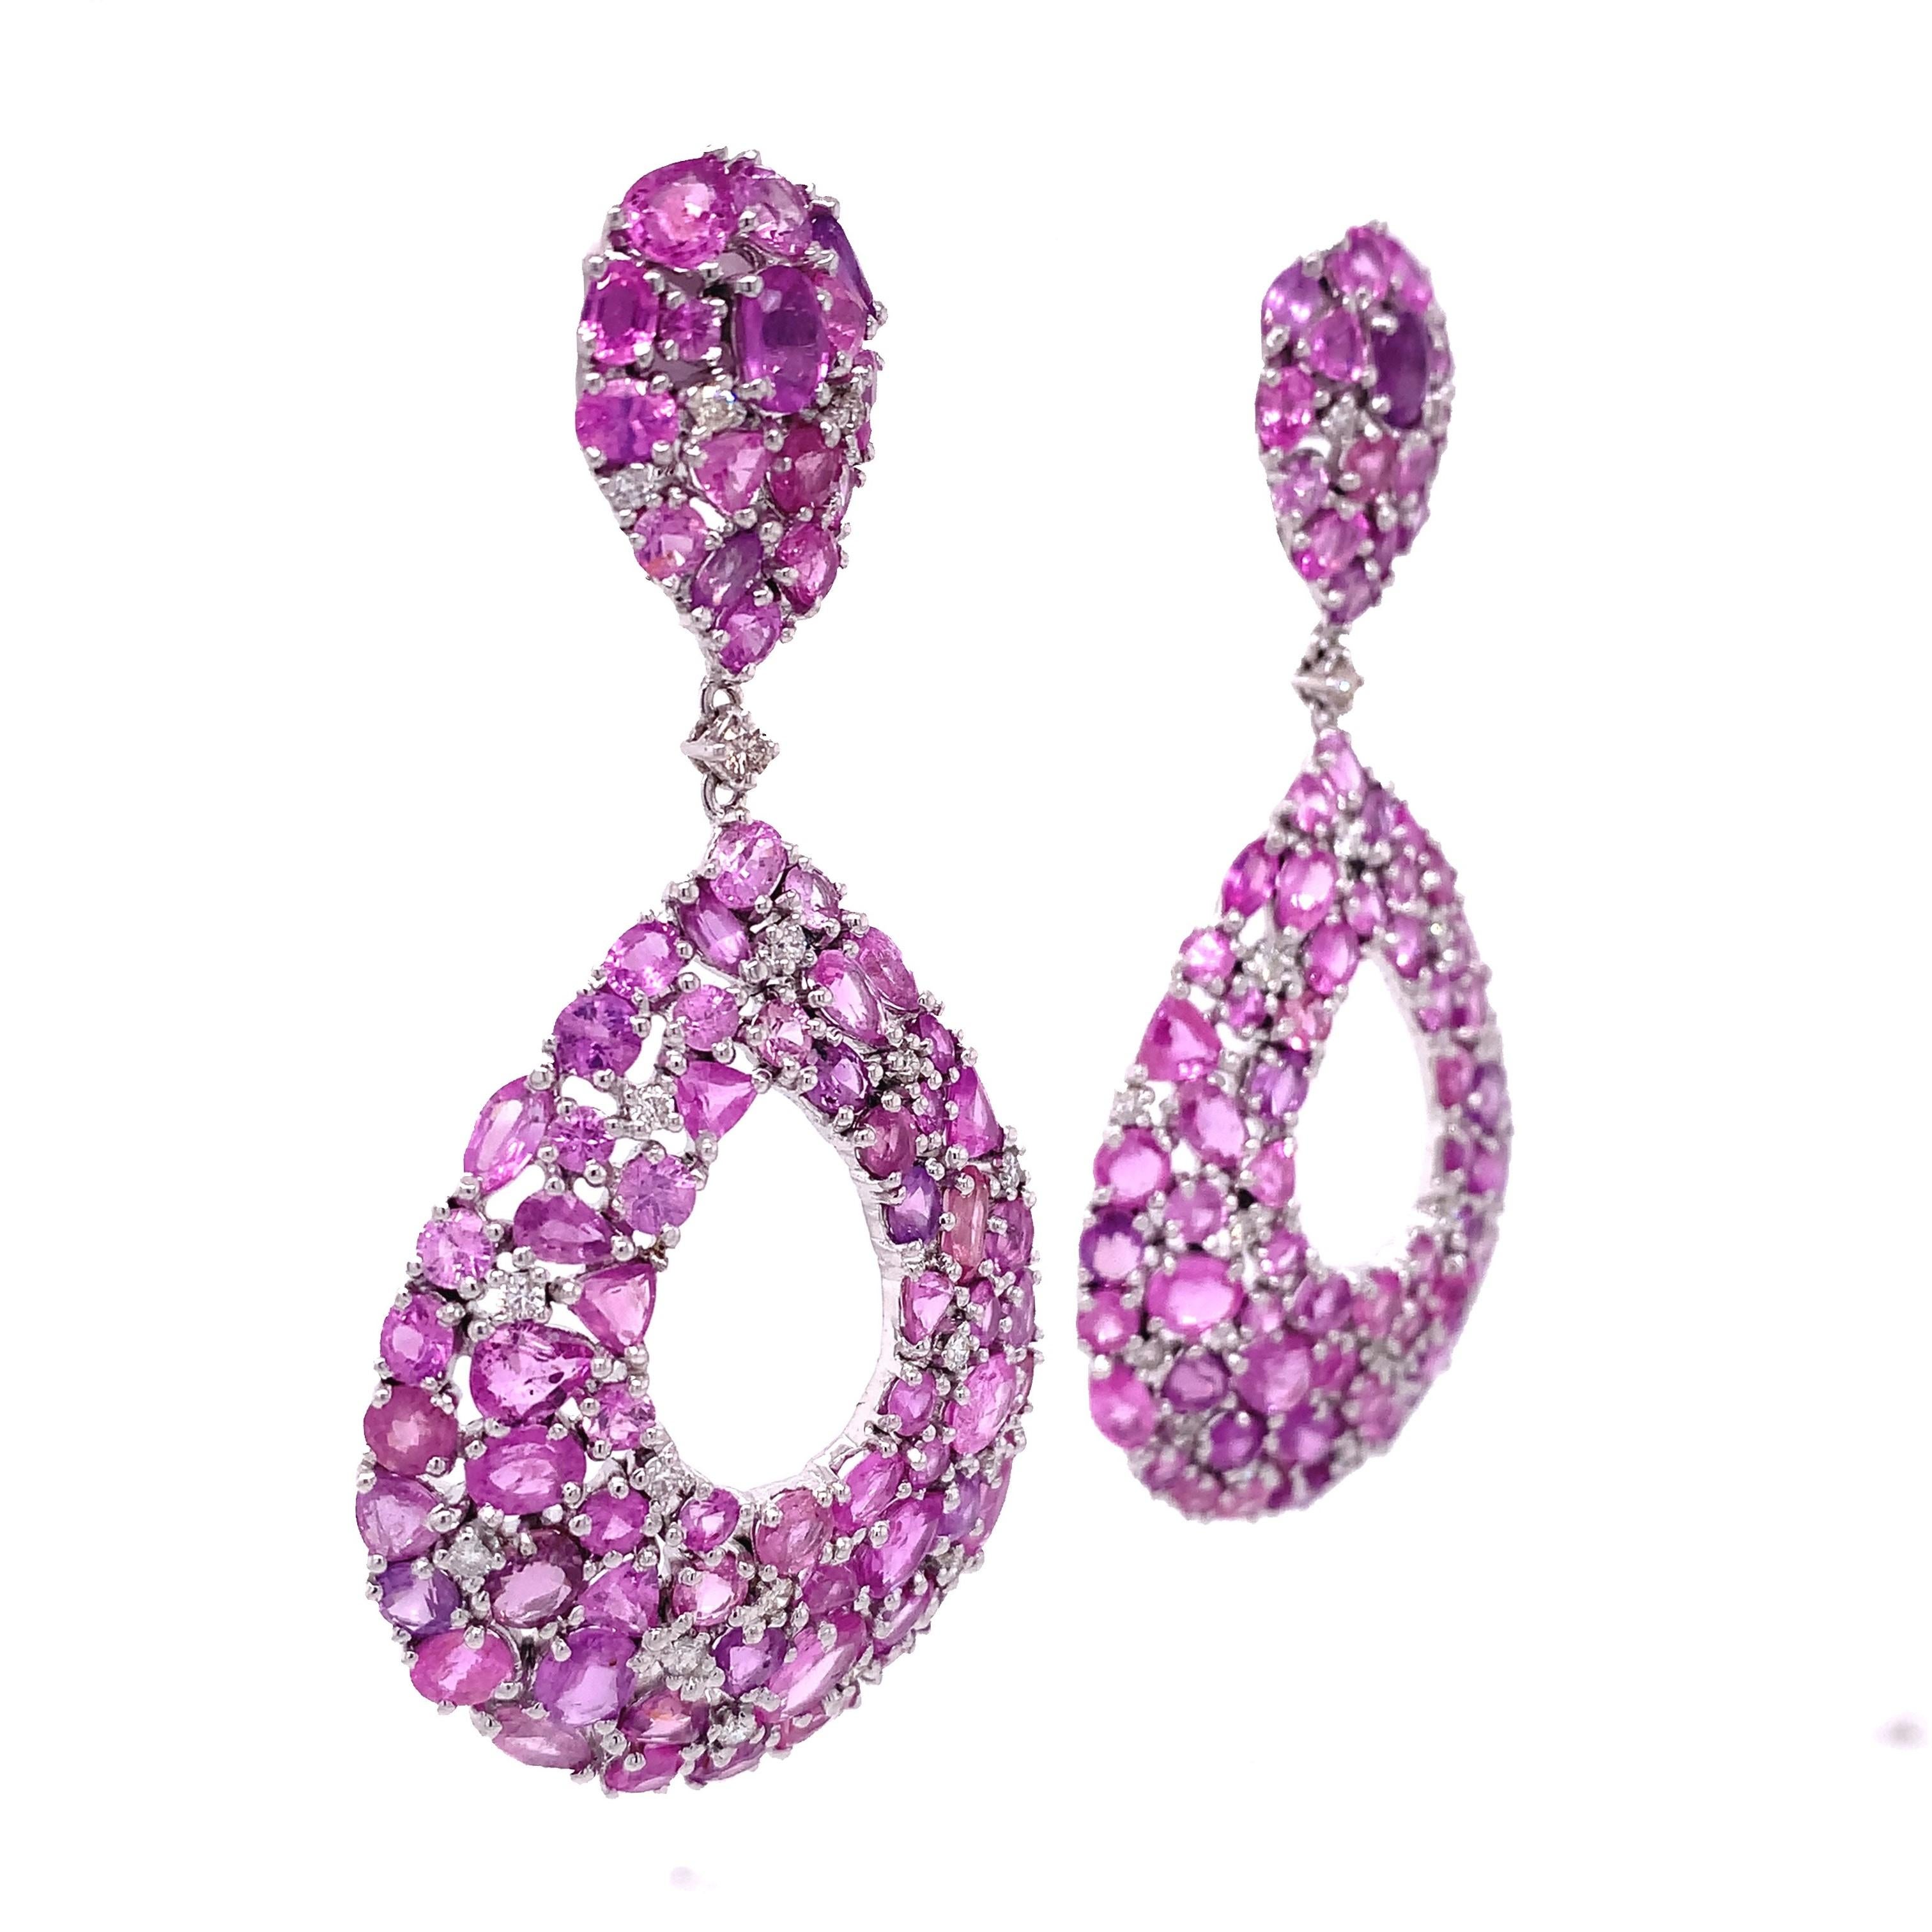 Pink Rose Collection

Combination of several shapes Pink Sapphire with white diamonds featuring dangle drop earrings set in 18K white gold.

Pink Sapphire: 33.09ct total weight.
Diamond: 0.91ct total weight.
All diamonds are G-H/SI stones.

